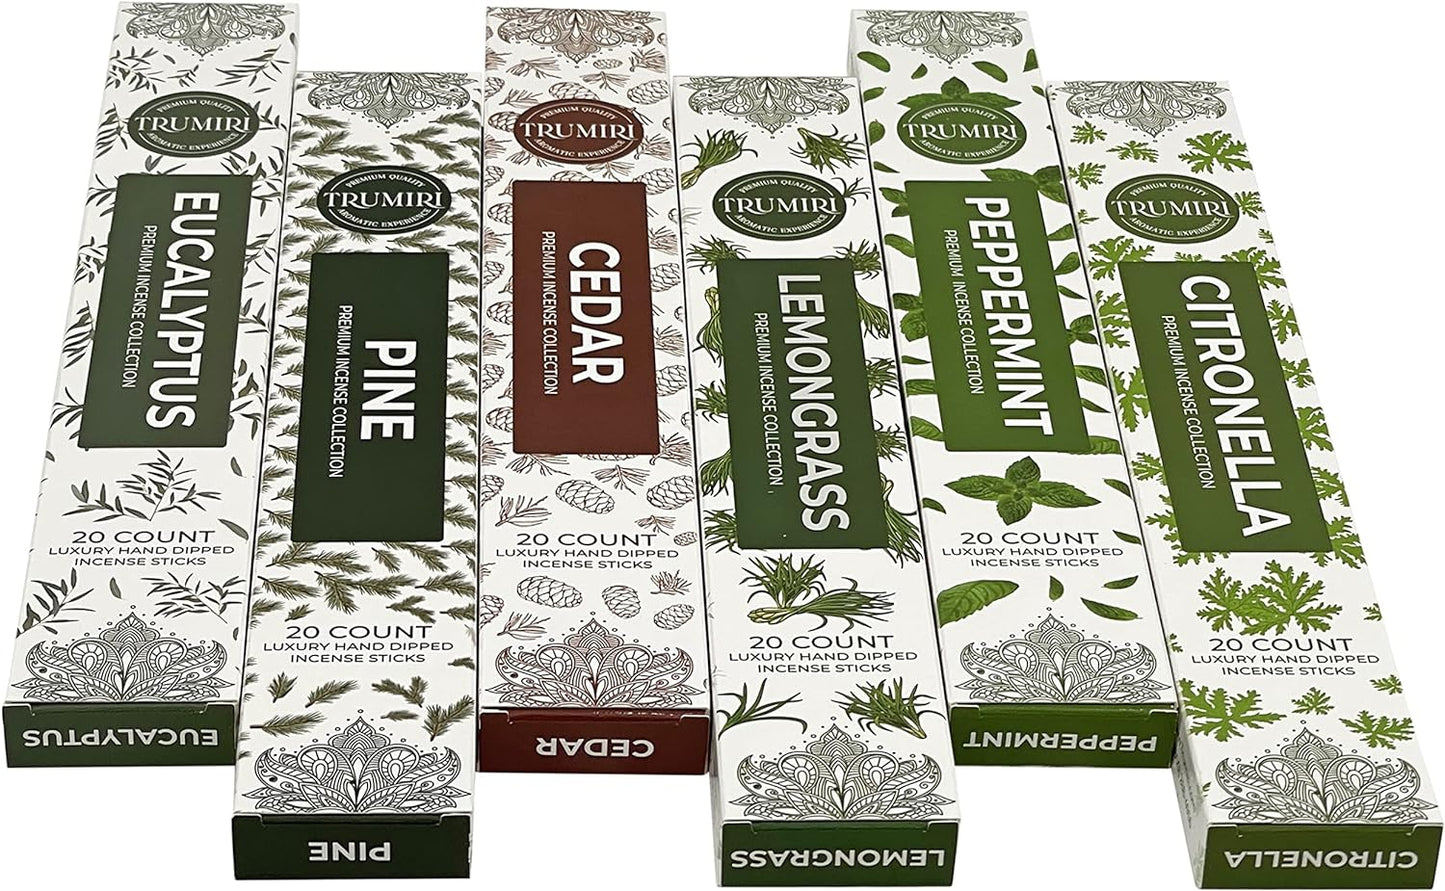 Leafy Incense Sticks Variety Pack with Incense Holder